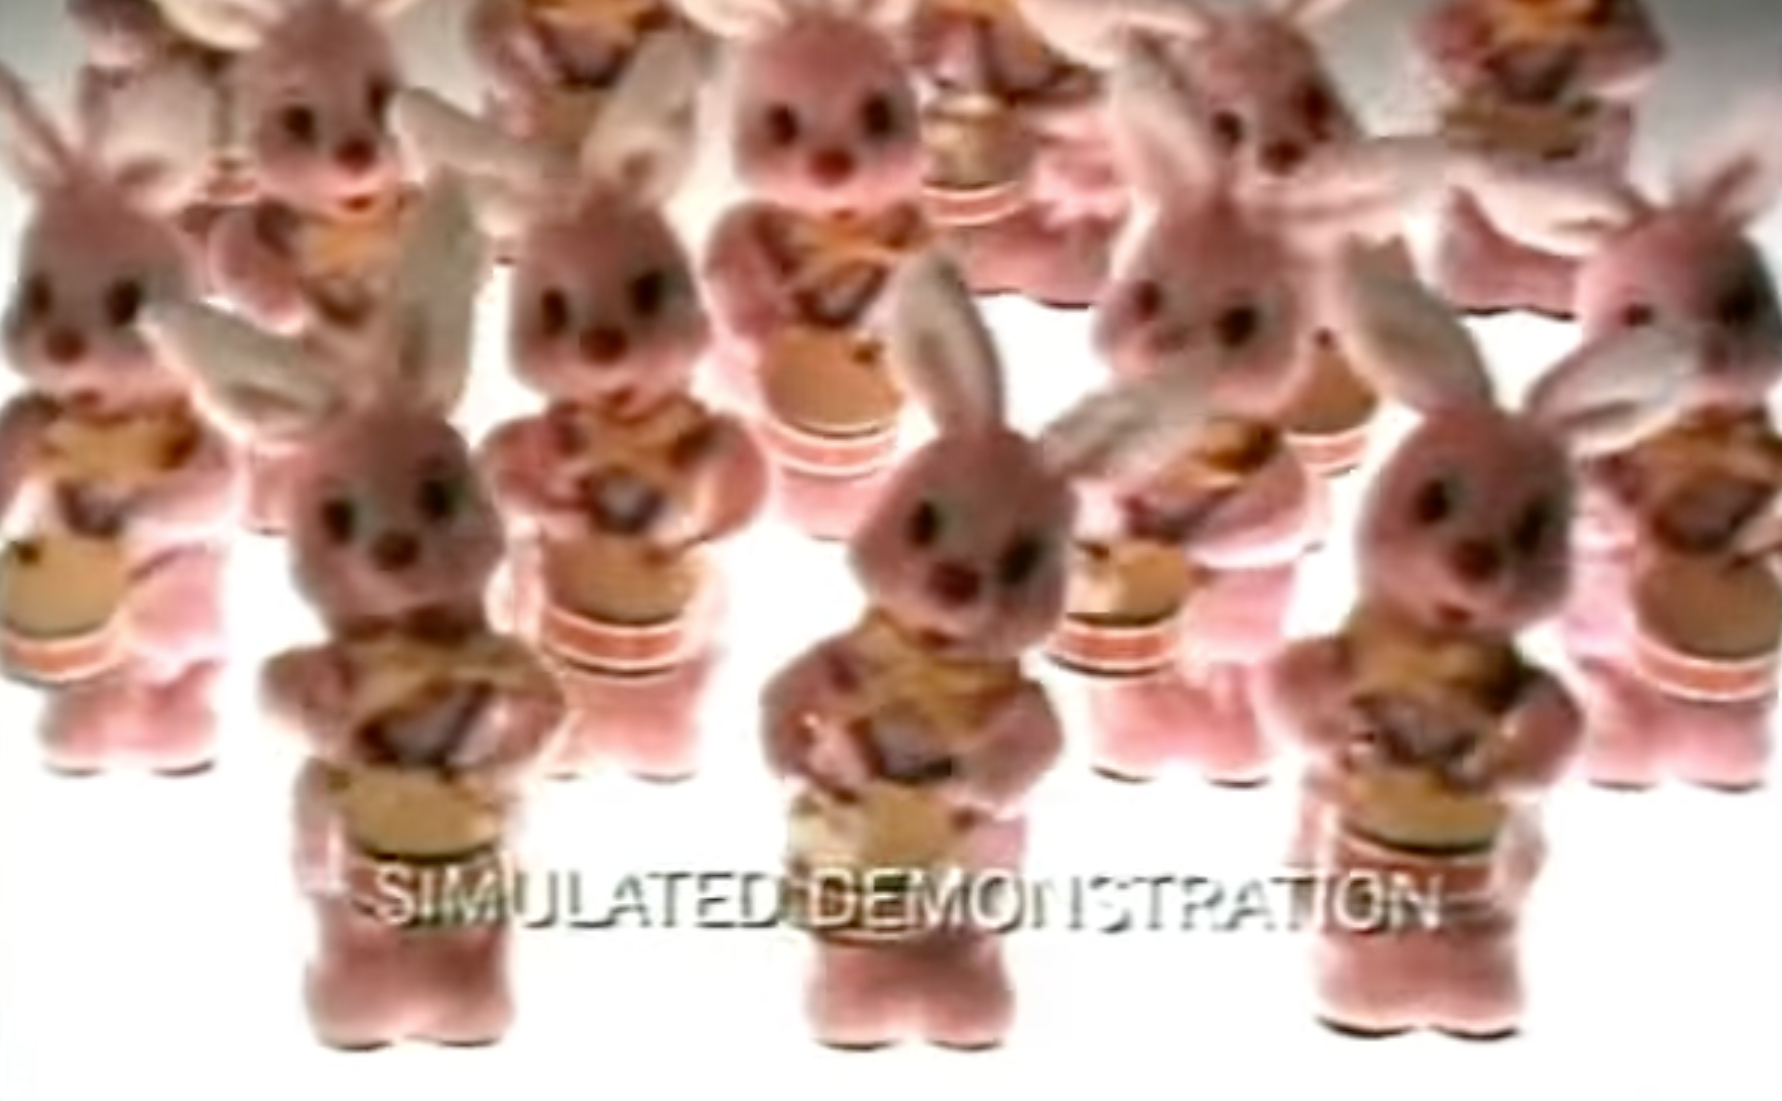 A collection of pink soft toy rabbits playing drums. Words across the bottom of the screen read "SIMULATED DEMONSTRATION"